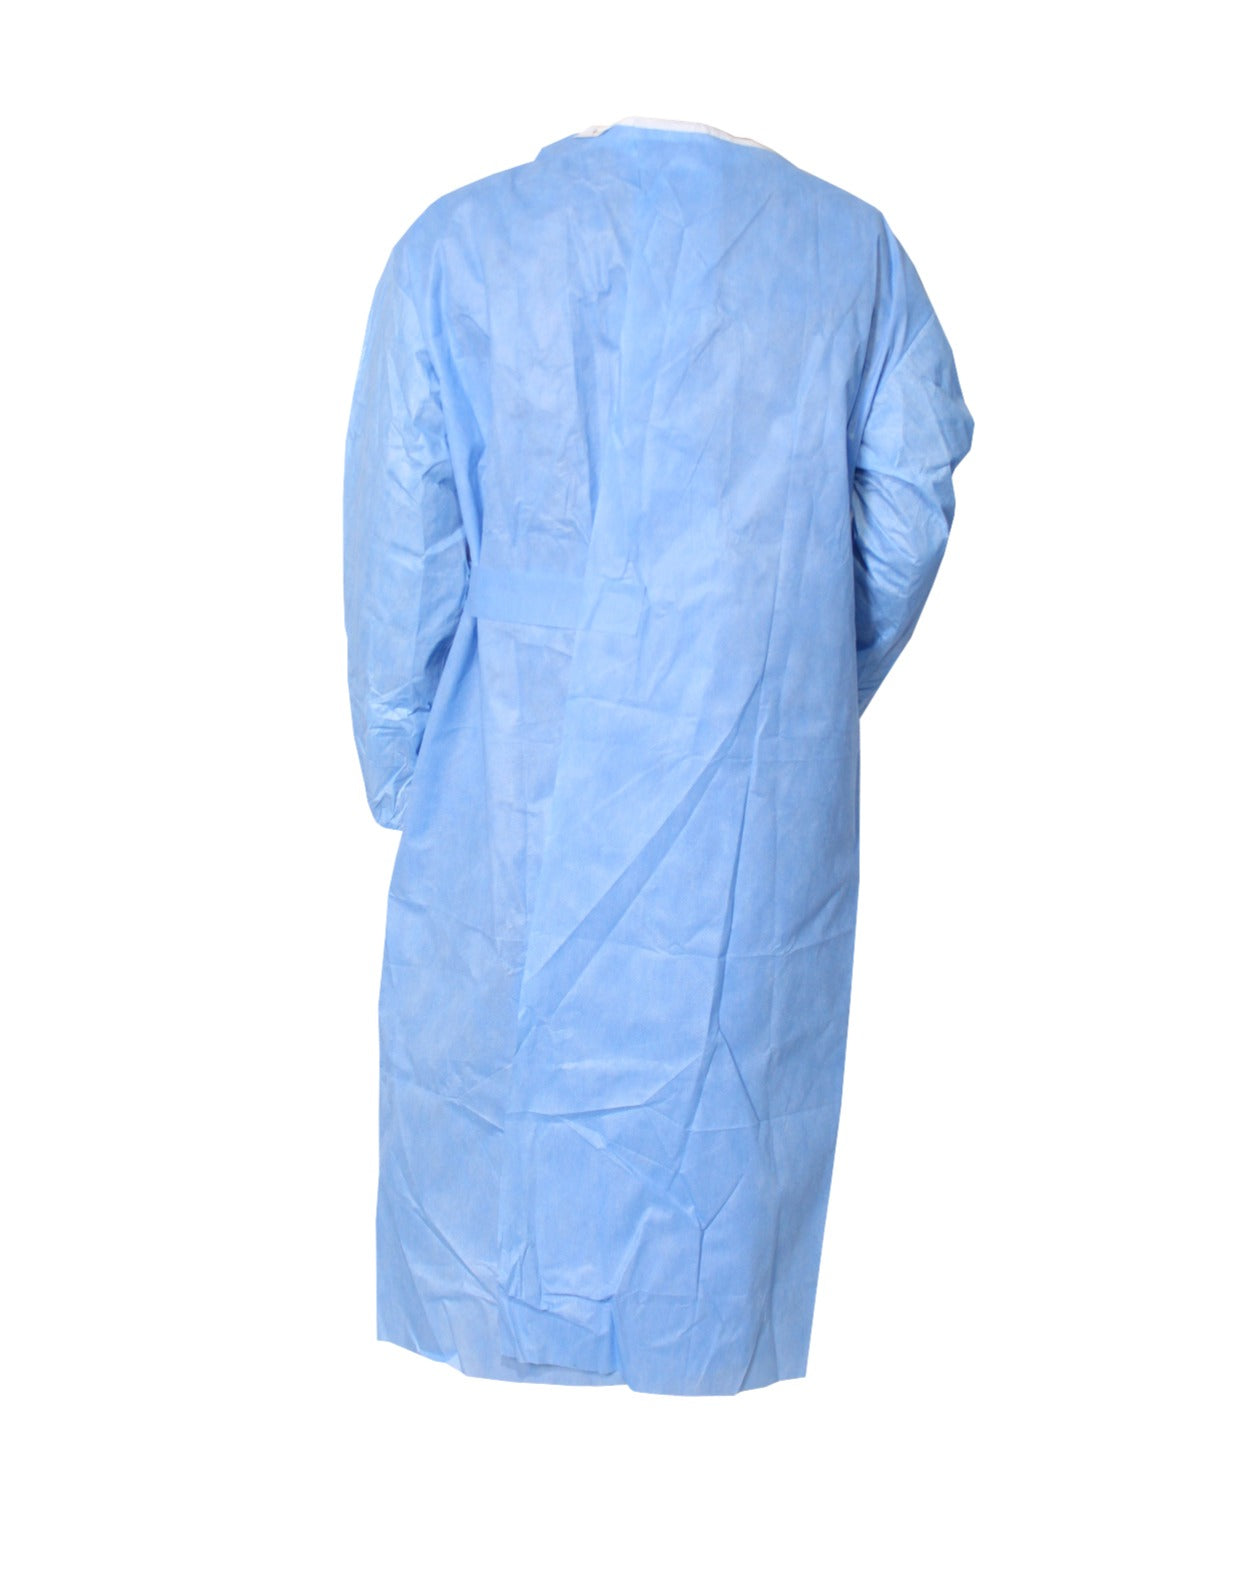 Non-Sterile Reinforced Surgical Gown